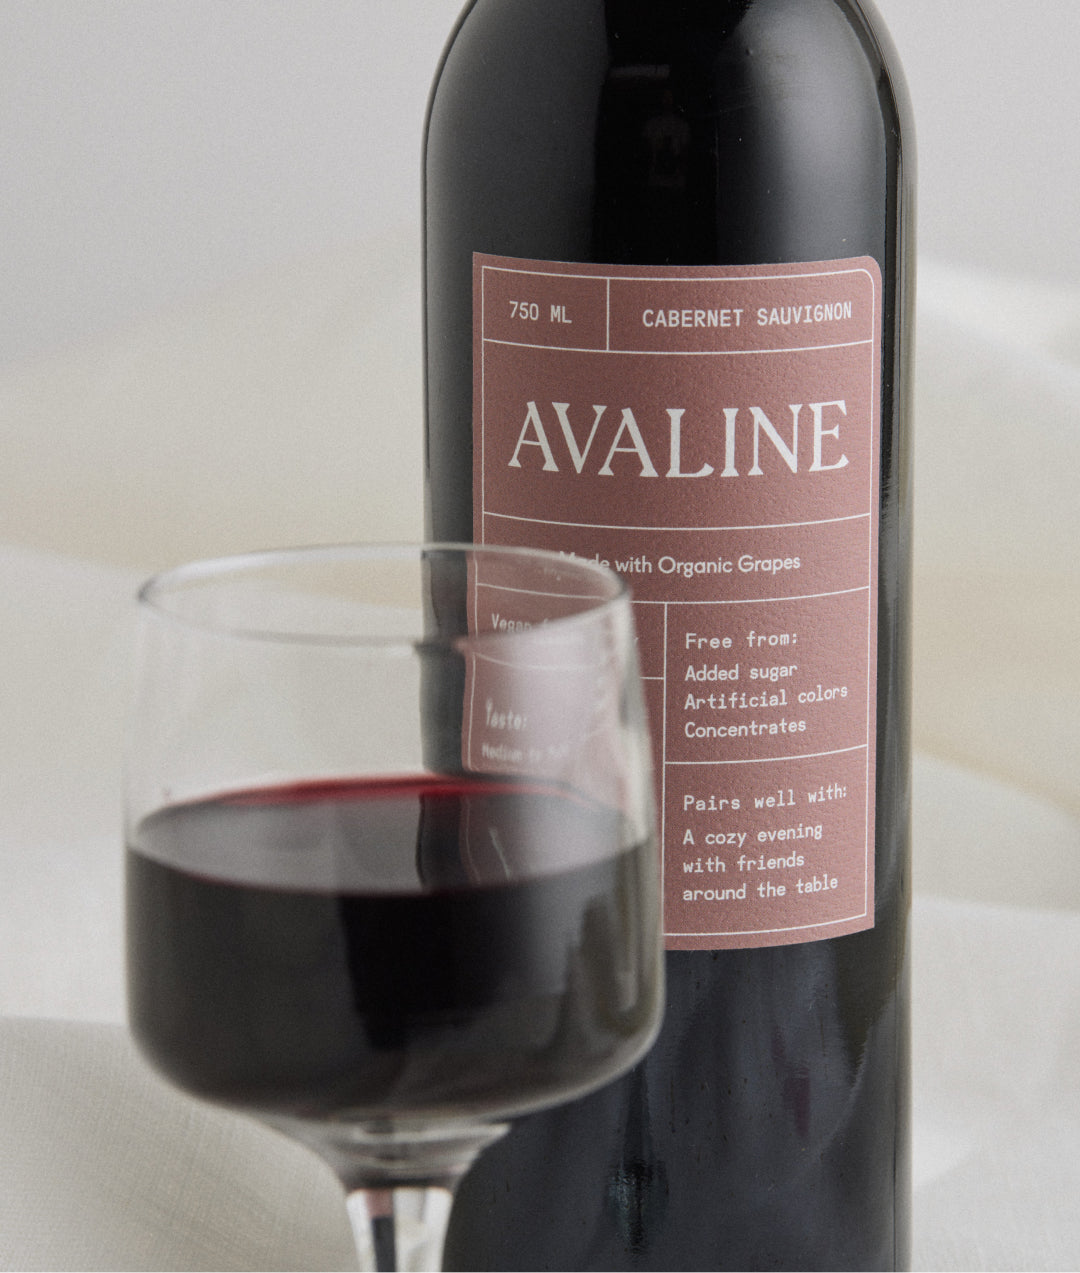 A close up photo of Avaline Cabernet Sauvignon wine bottle and wine in a glass